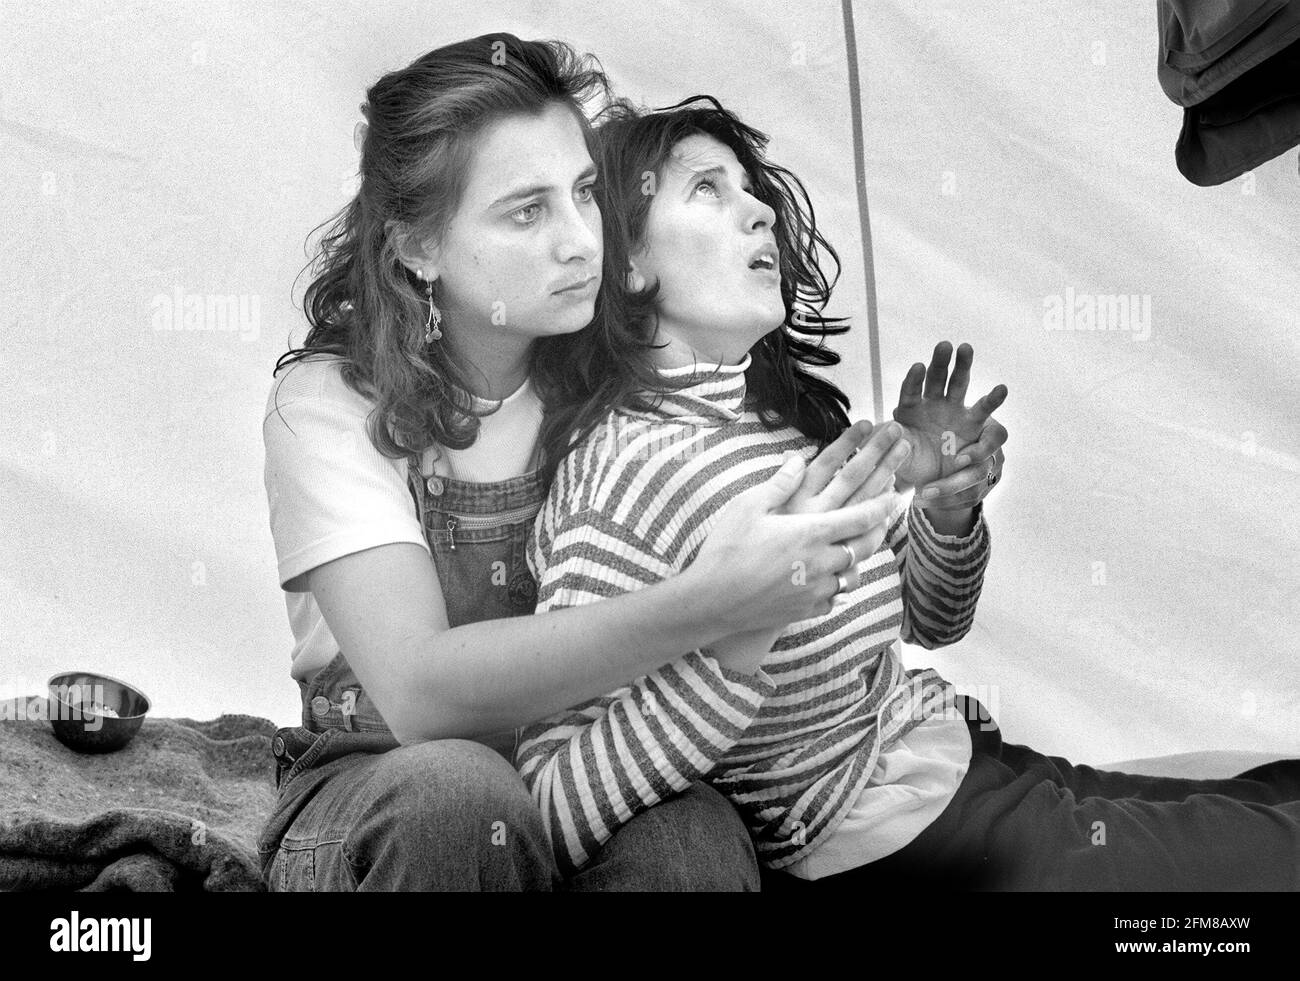 TRAUMERTISED BY HER EXPERIENCES IN KOSOVO A YOUNG WOMAN IS COMFORTED IN THE MDM TENT AT THE ALBANIAN BORDER. Stock Photo